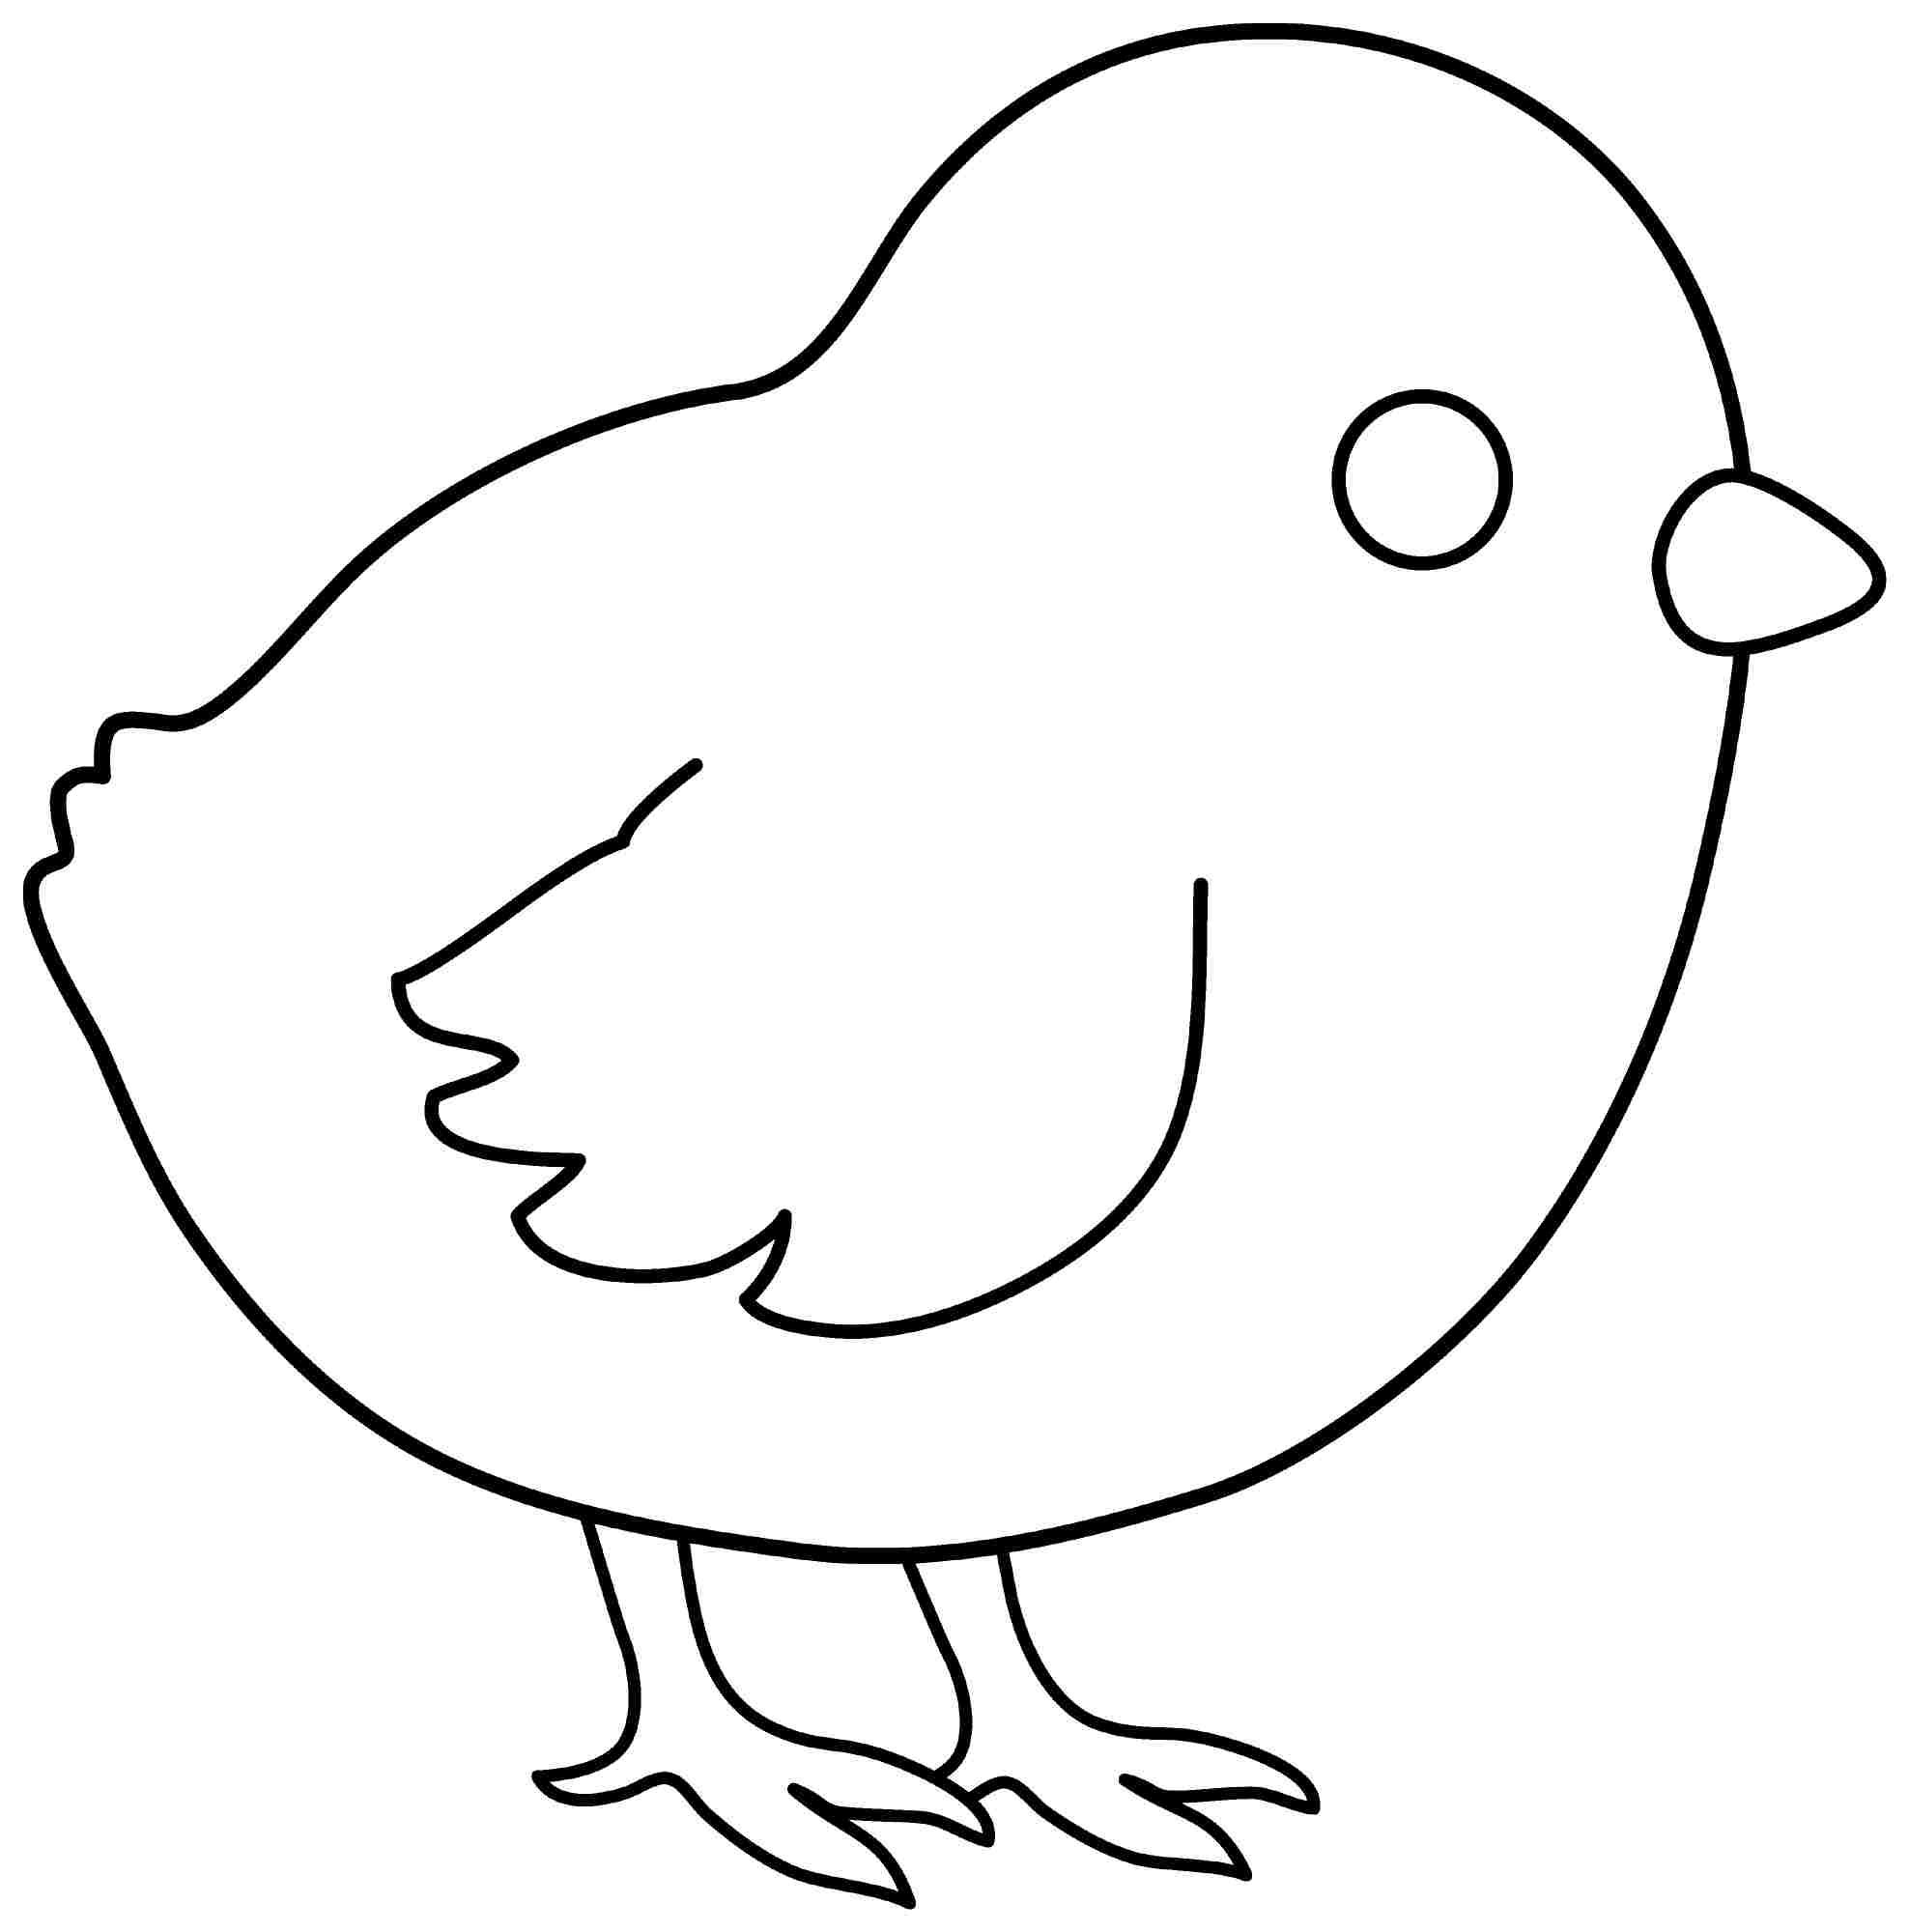 7-best-images-of-printable-chick-and-chicken-baby-chick-outline